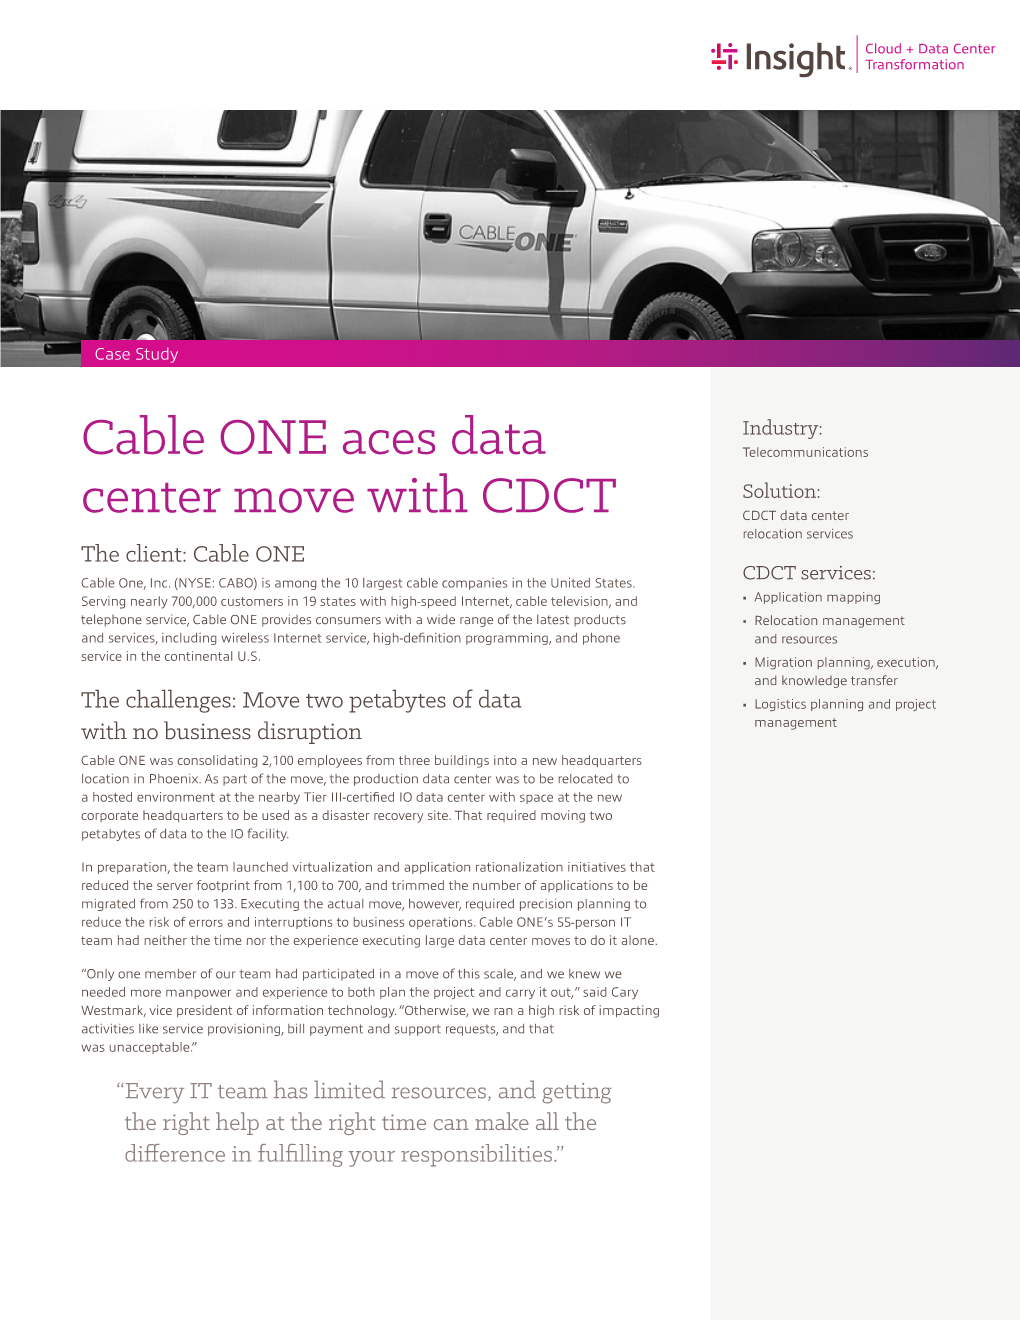 Cable ONE Aces Data Telecommunications Solution: Center Move with CDCT CDCT Data Center Relocation Services the Client: Cable ONE Cable One, Inc